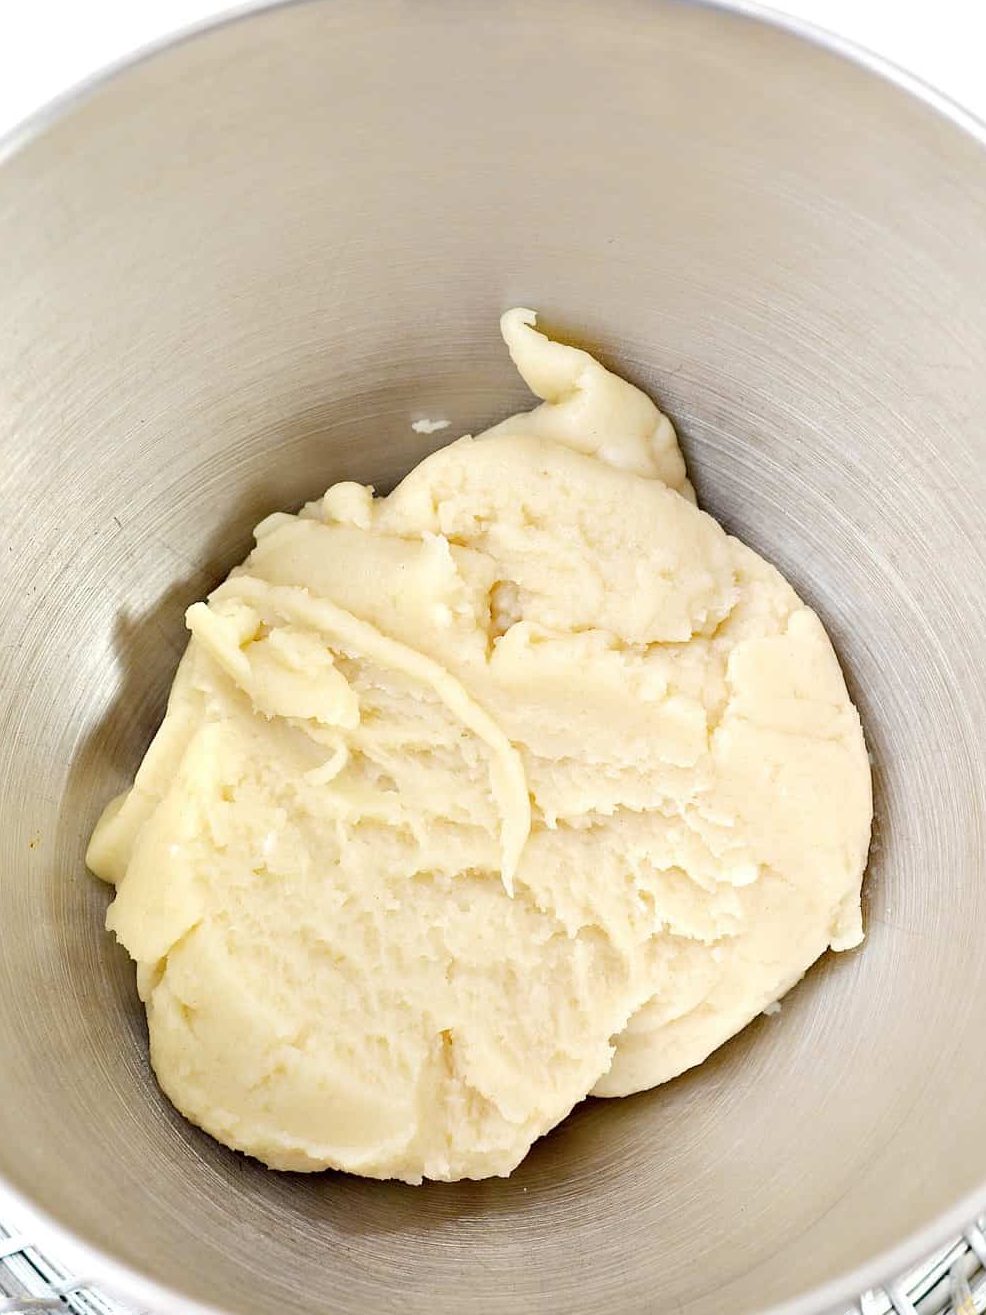 Add the dough to a mixing bowl, and beat on low until it has cooled down.